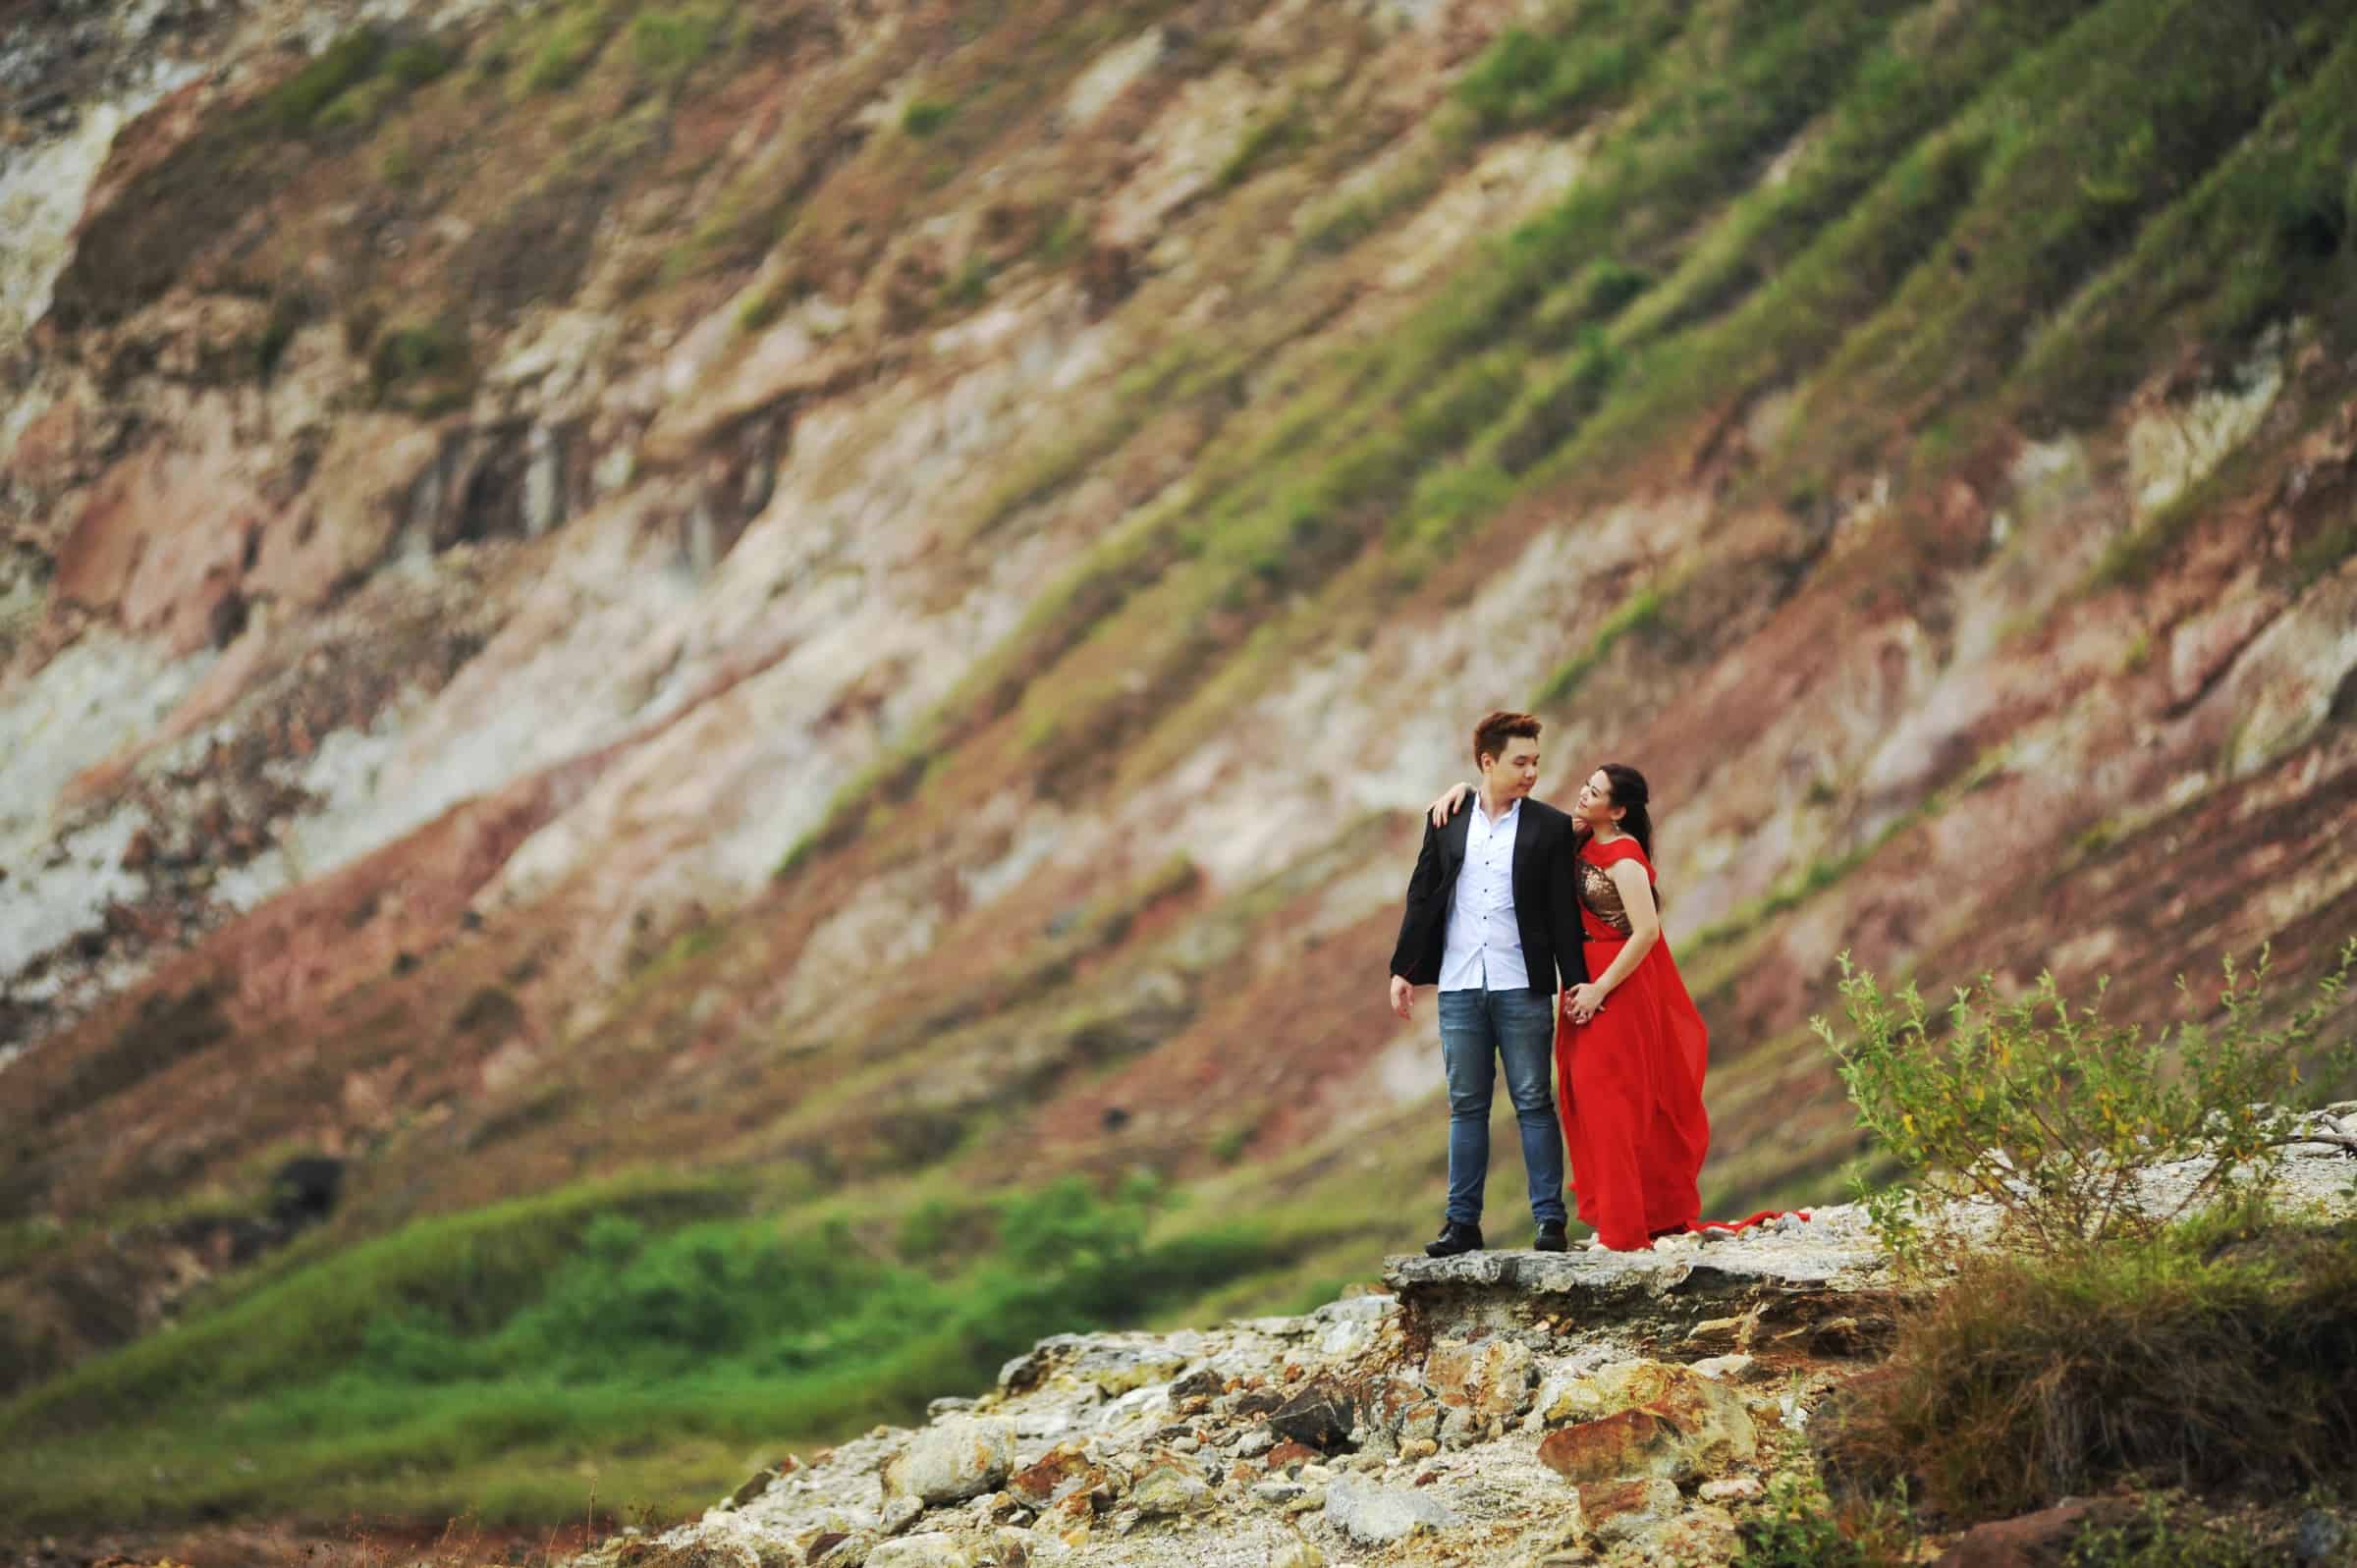 Leave and cleave in marriage - a prenuptial shot inside Taal Lake.